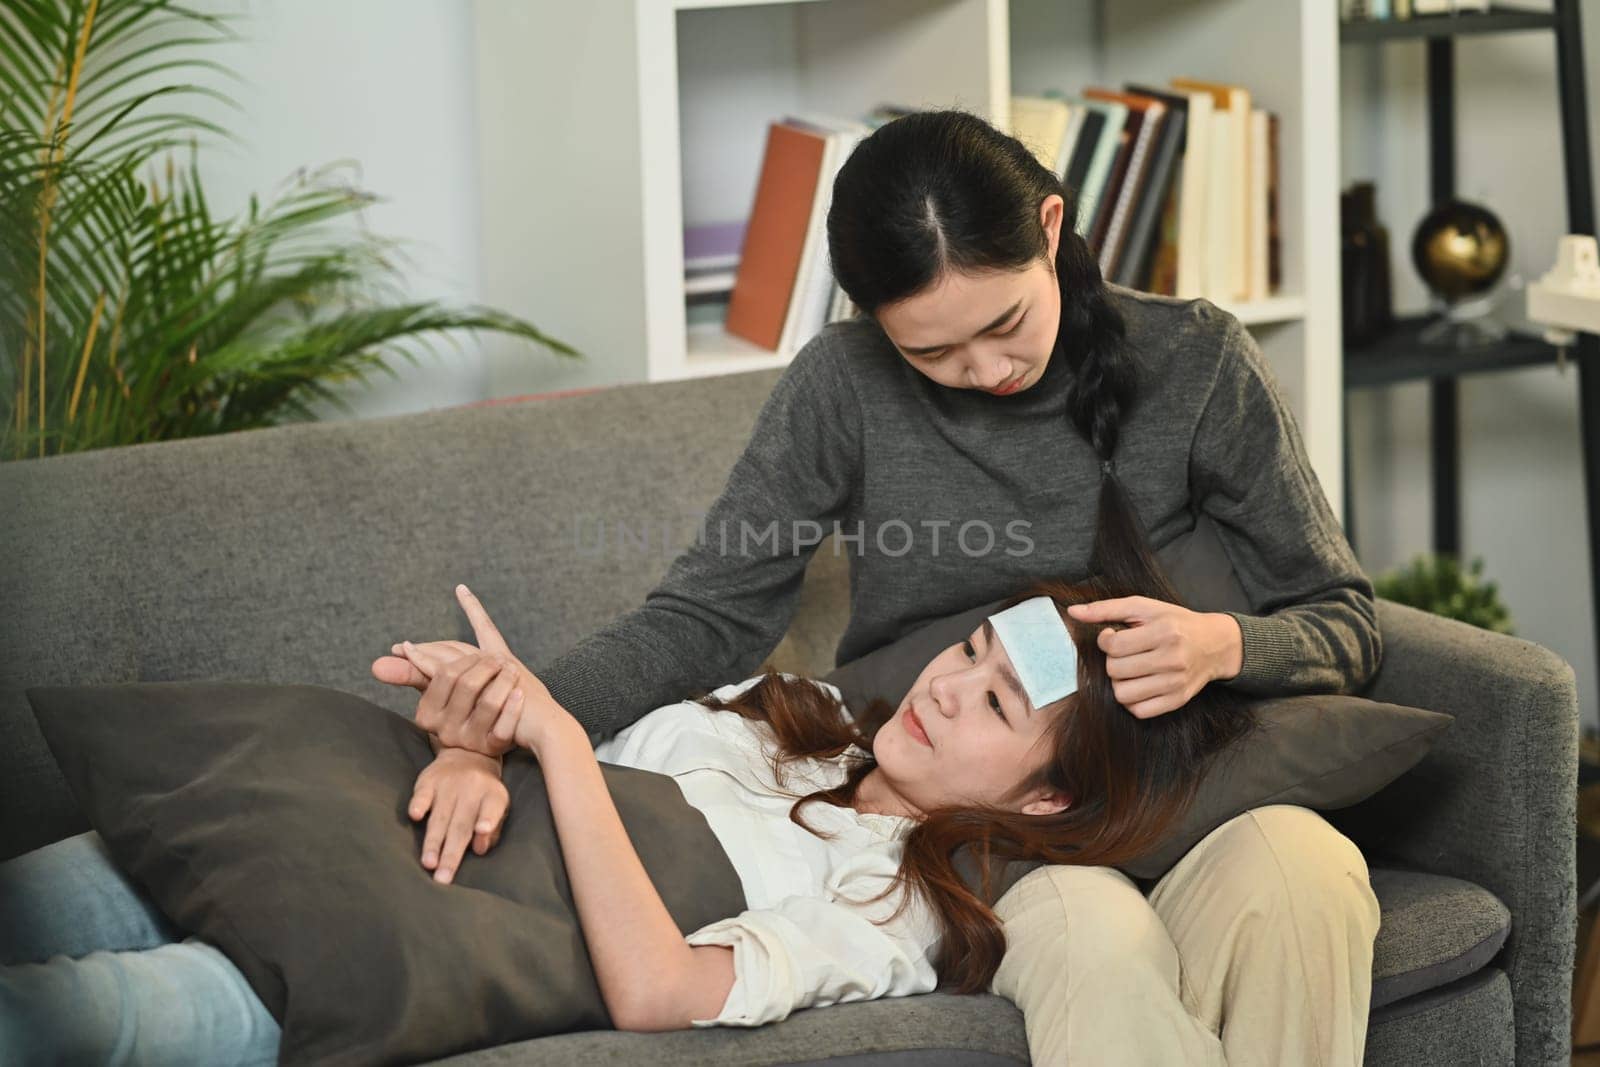 Affectionate women taking care of a sick girlfriend with fever on couch at home. LGBT, equal rights and love concept.